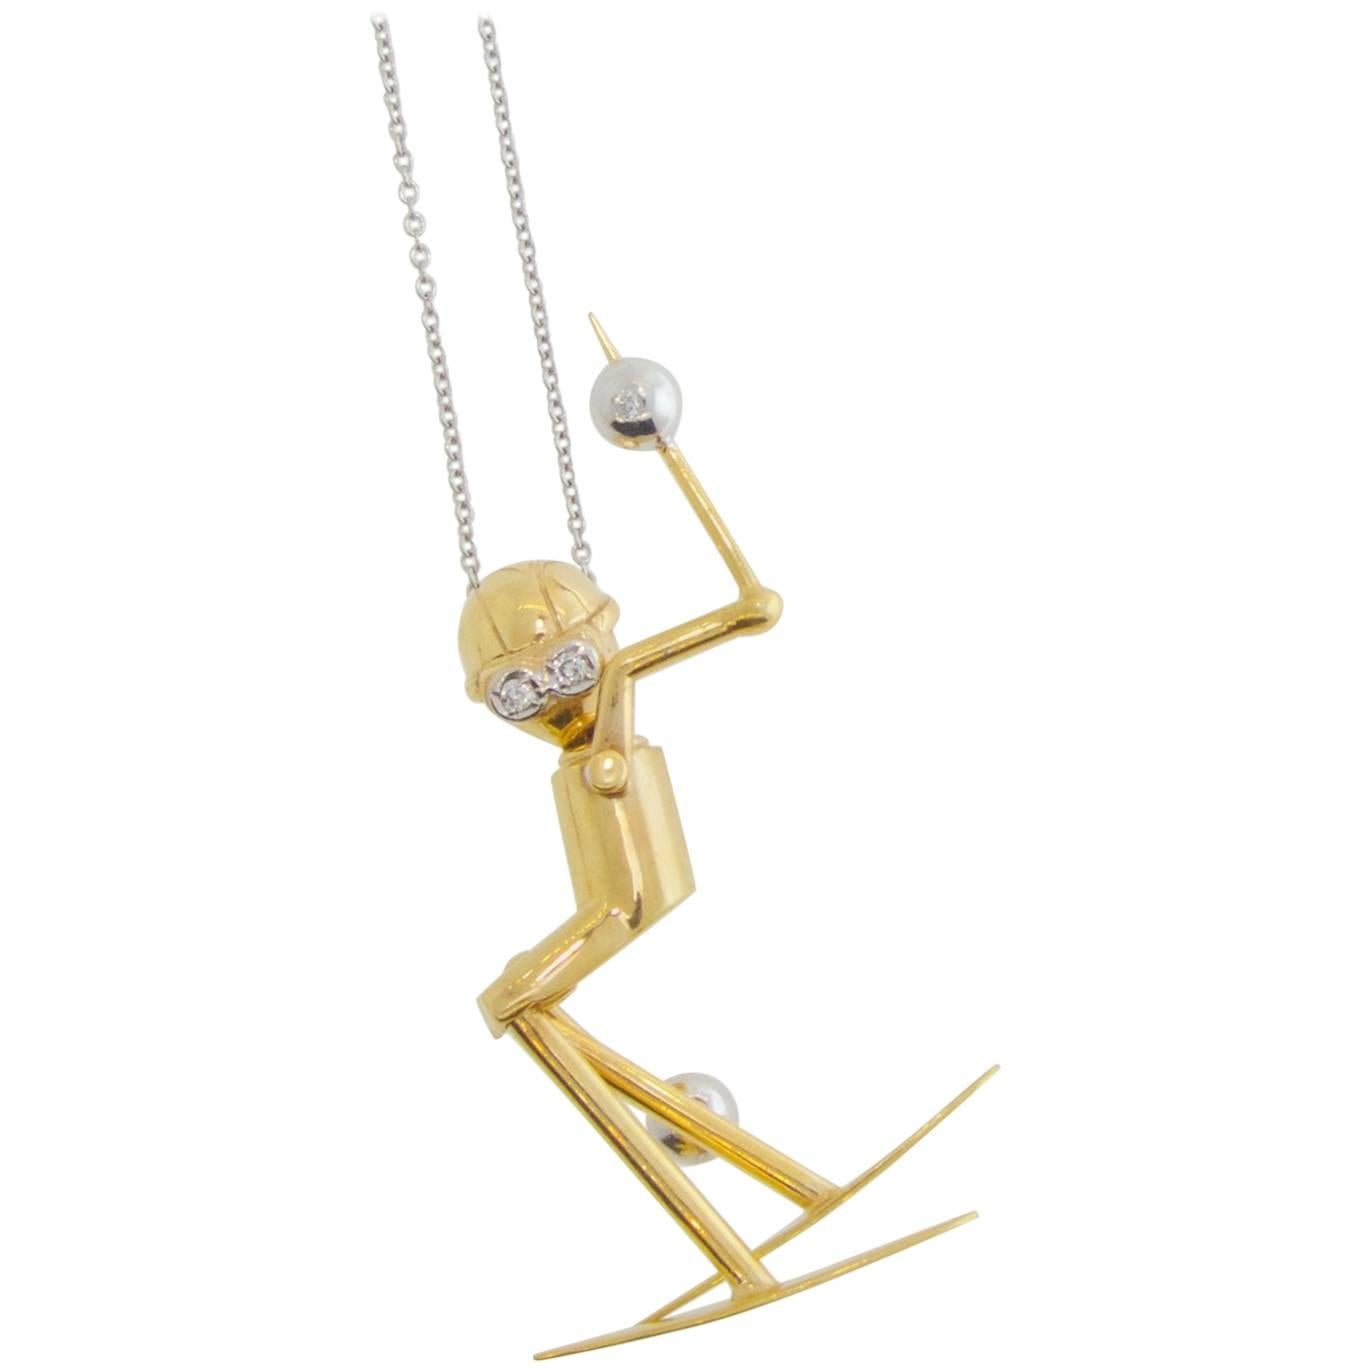 Skier Pendant in Gold with Diamond Accents